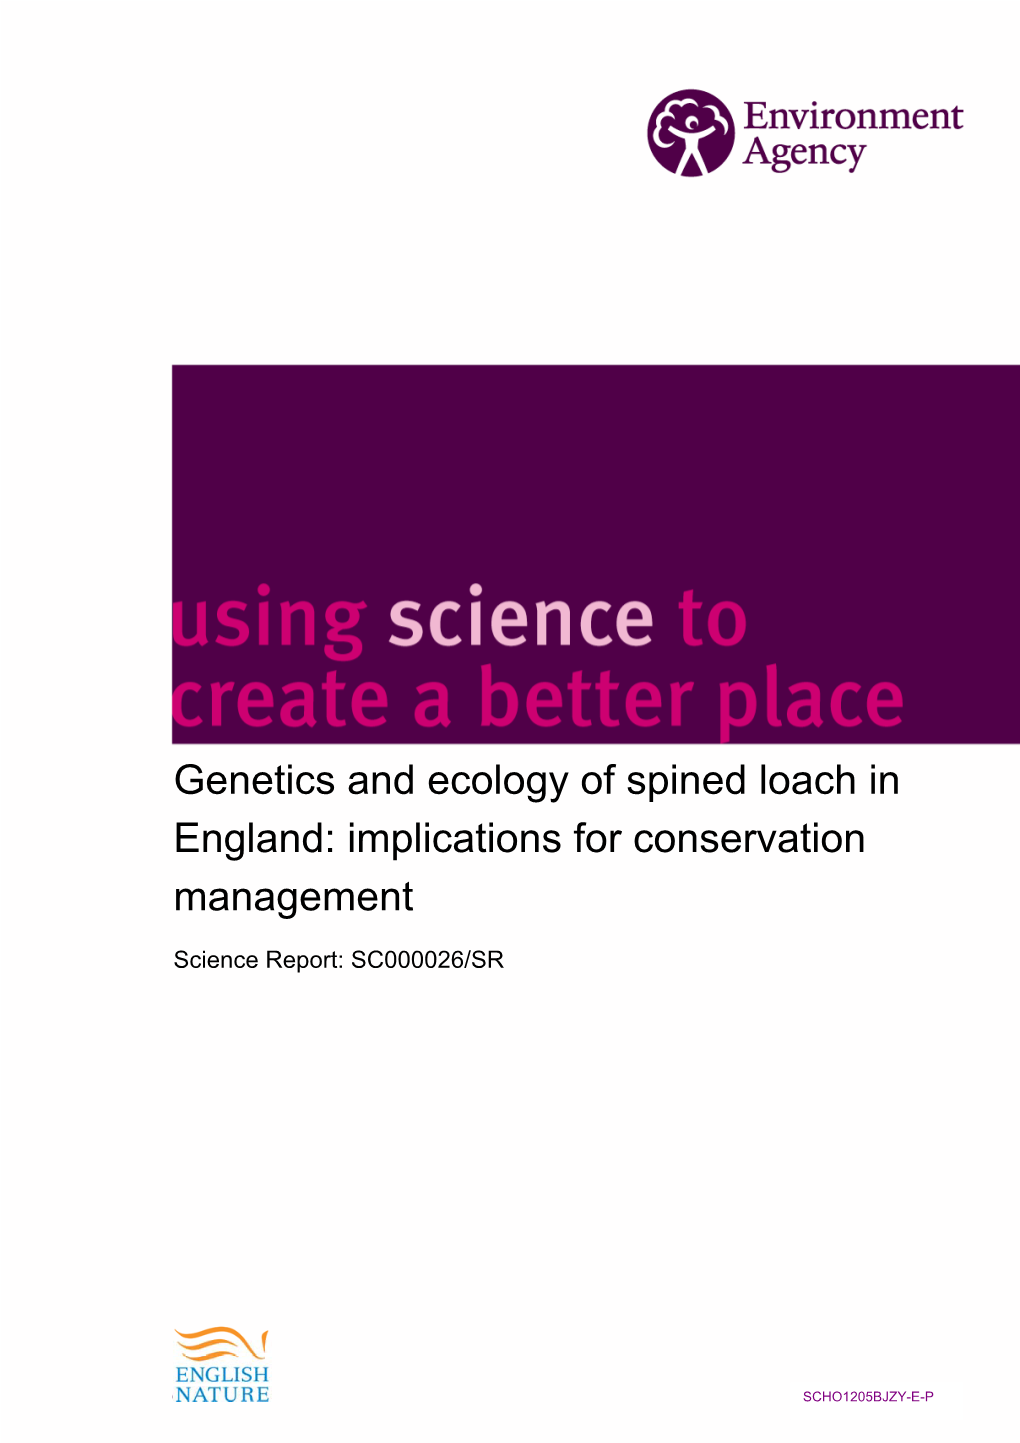 Genetics and Ecology of Spined Loach in England: Implications for Conservation Management